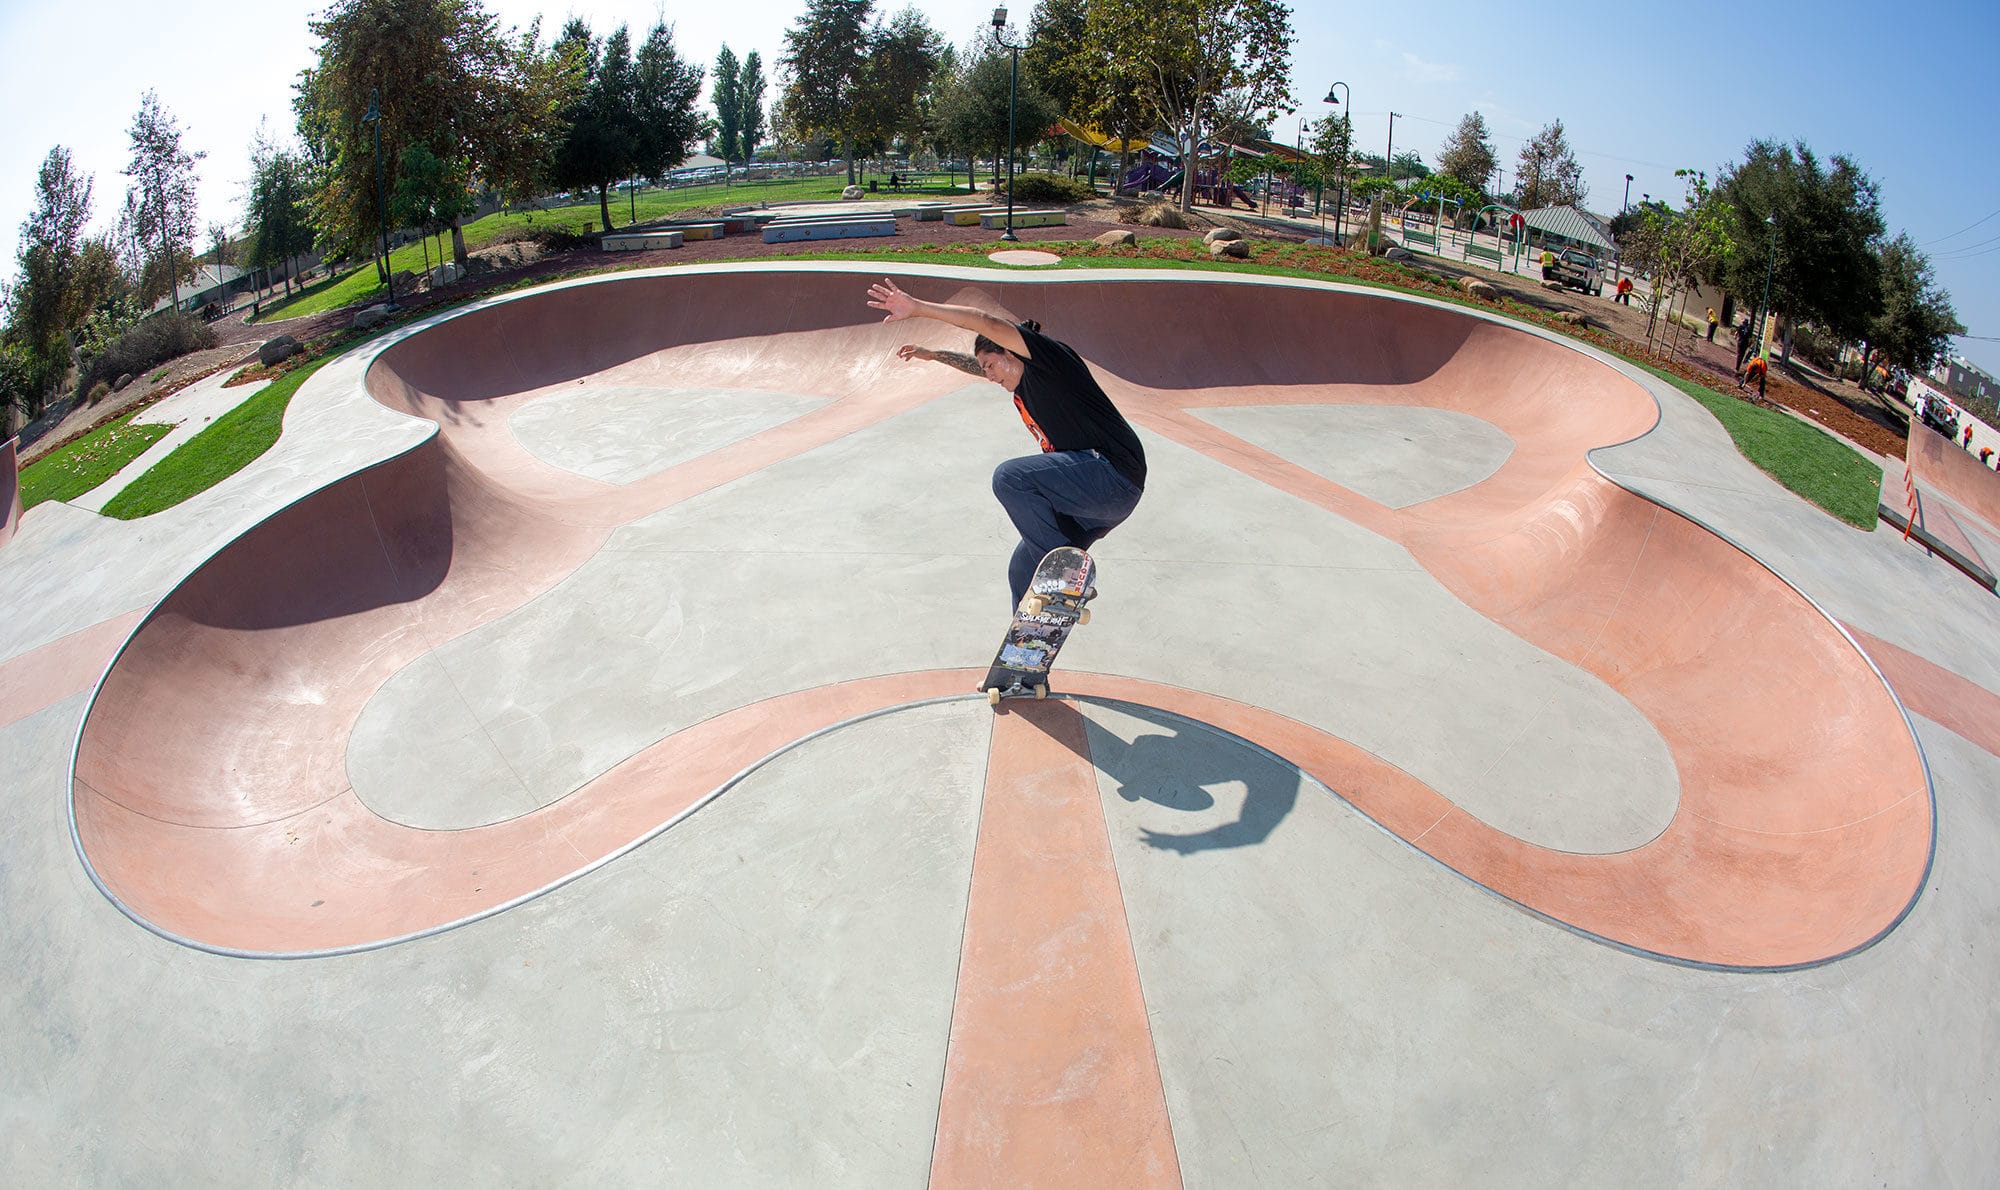 Butterfly Bowl at Gibson Mariposa Skatepark in El Monte, CA with Robby doing a blunt